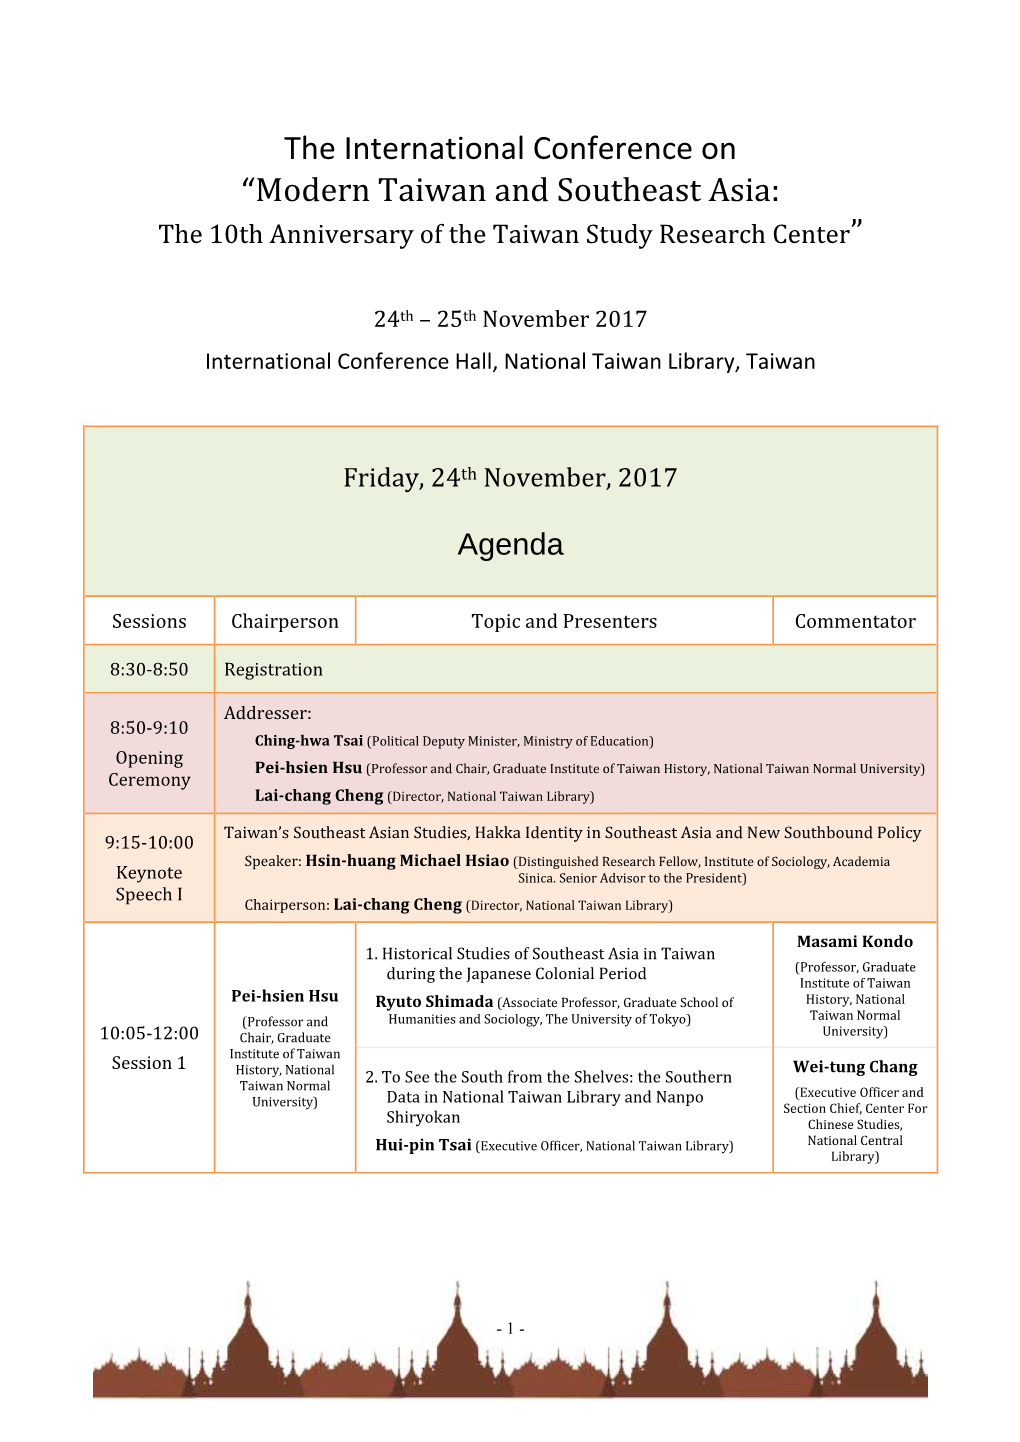 The International Conference on “Modern Taiwan and Southeast Asia: the 10Th Anniversary of the Taiwan Study Research Center”